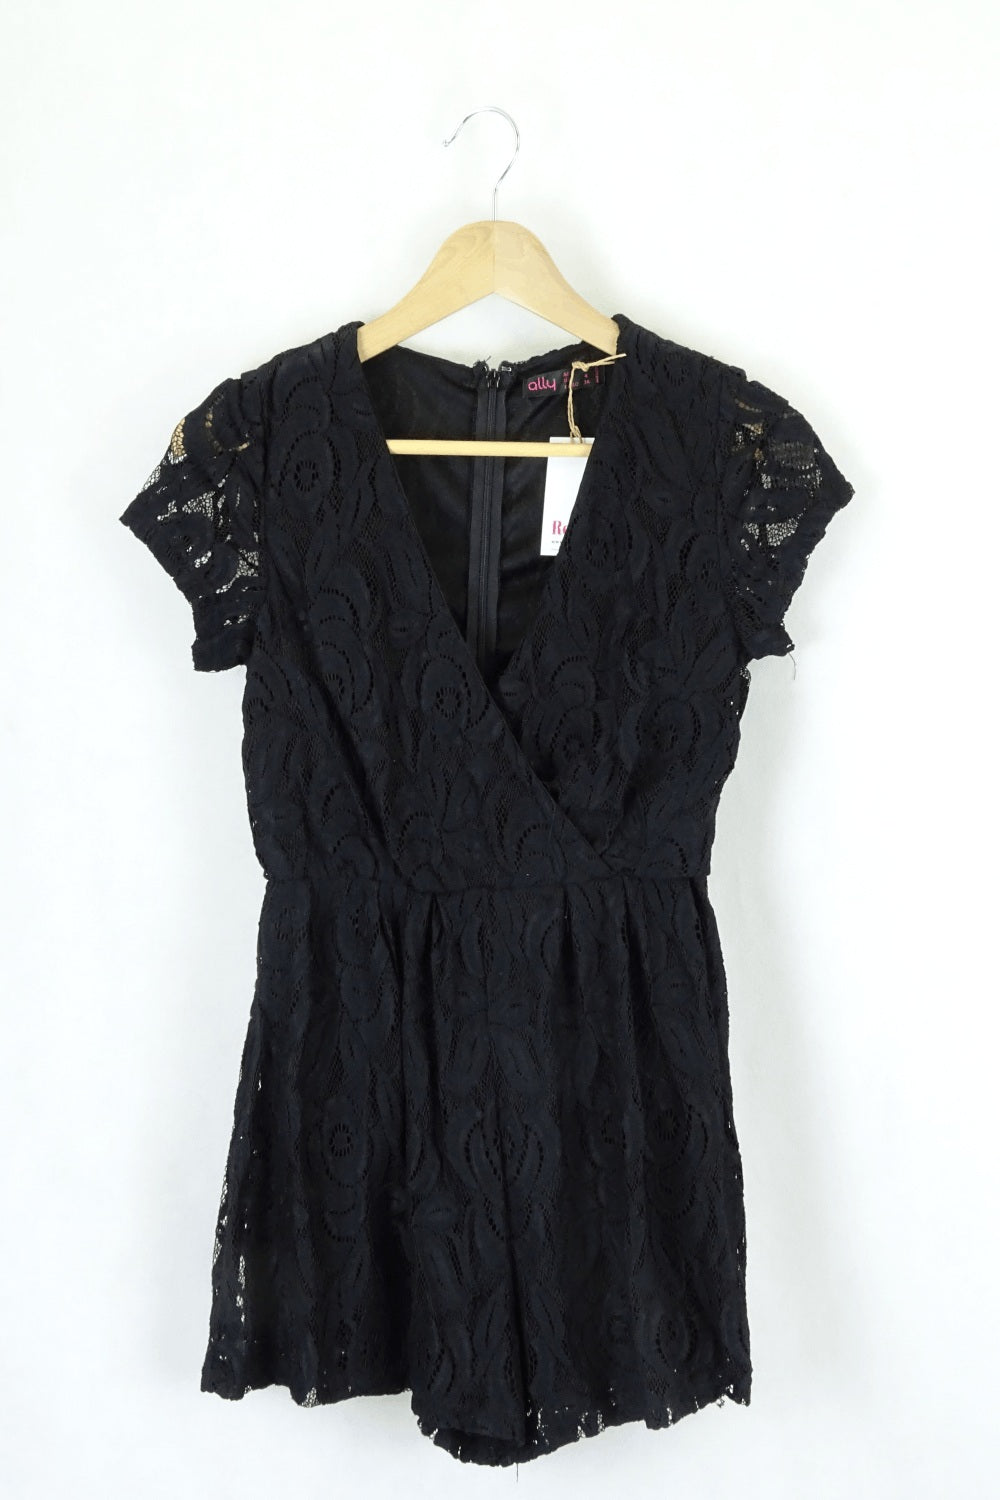 Ally Fashion Black Lace Playsuit 8